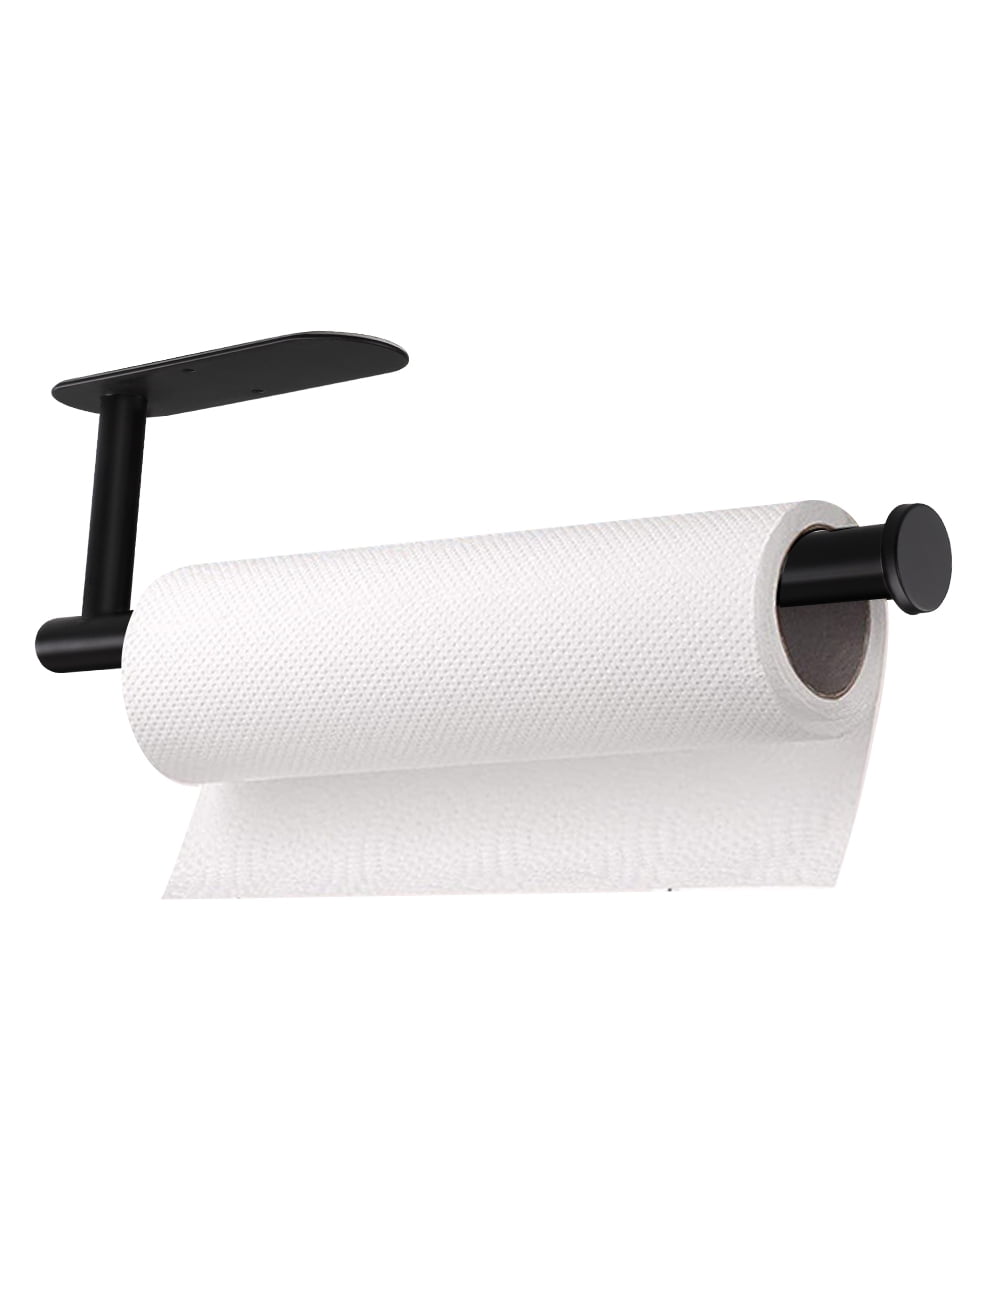 Self-Adhesive Kitchen Paper Towel Rack Toilet Roll Holder Wall Mount Tissue 